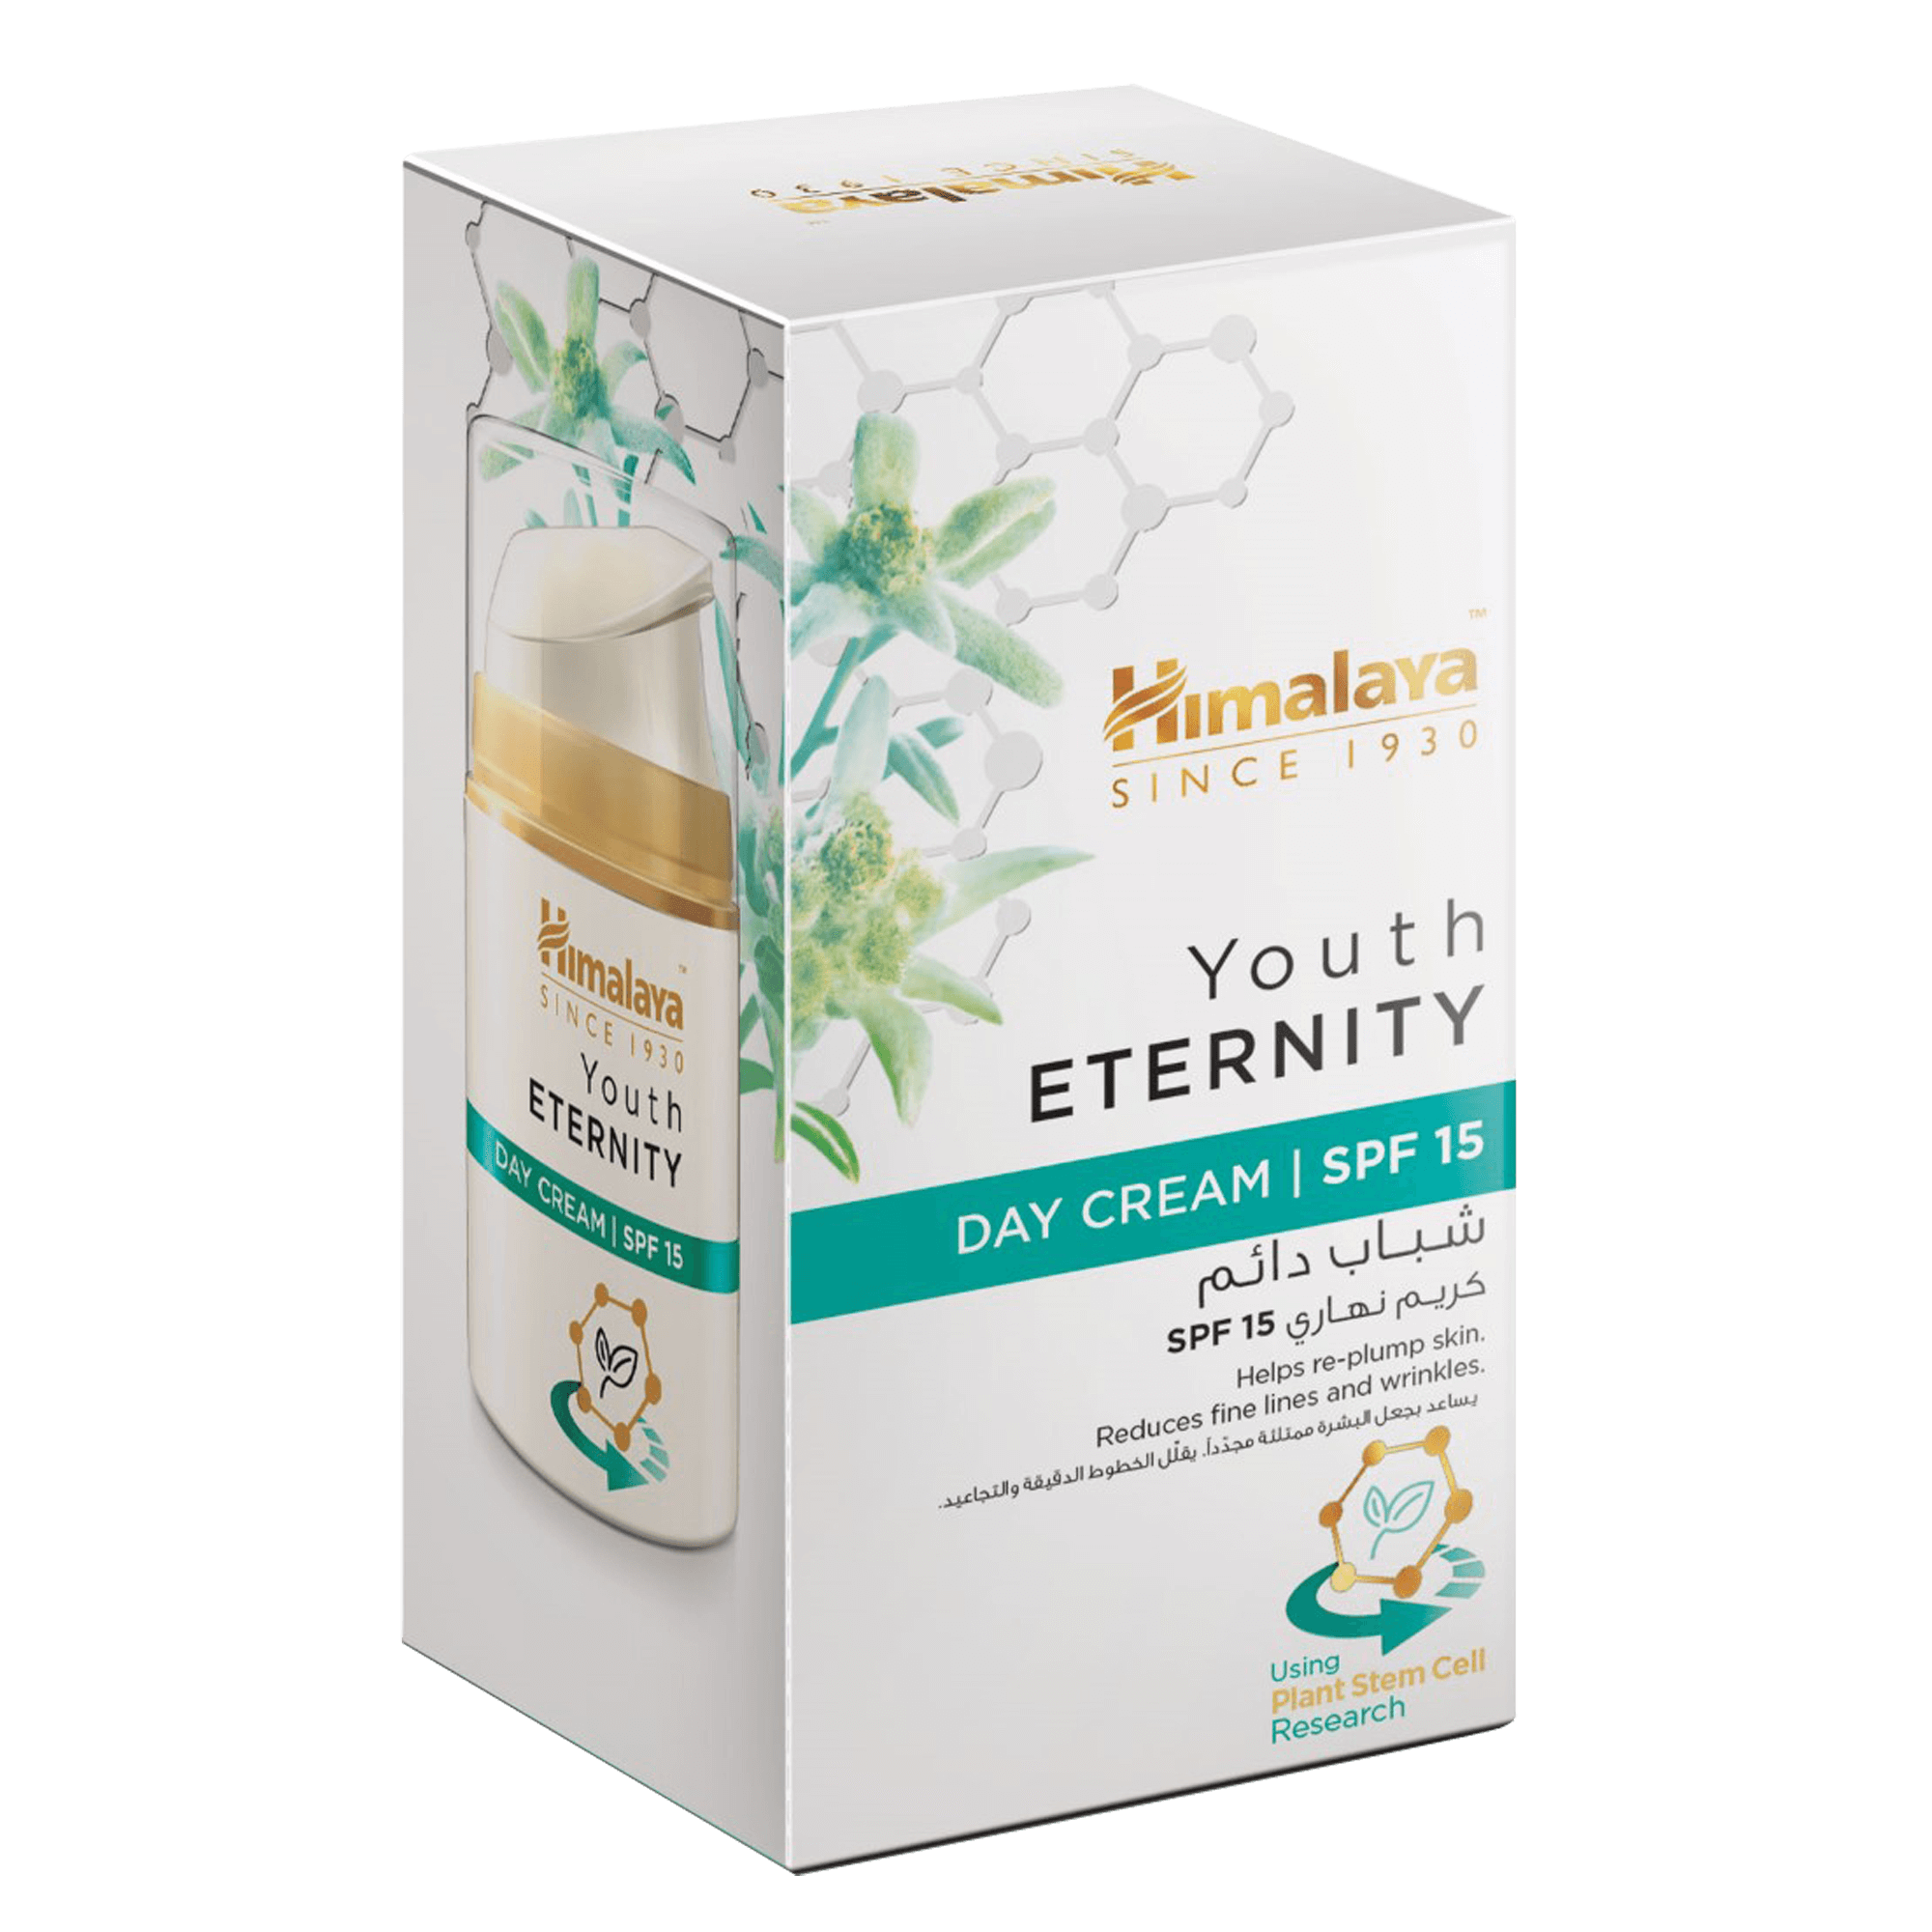 Himalaya Youth Eternity Day Cream 50g - Reduces Fine Lines & Wrinkles